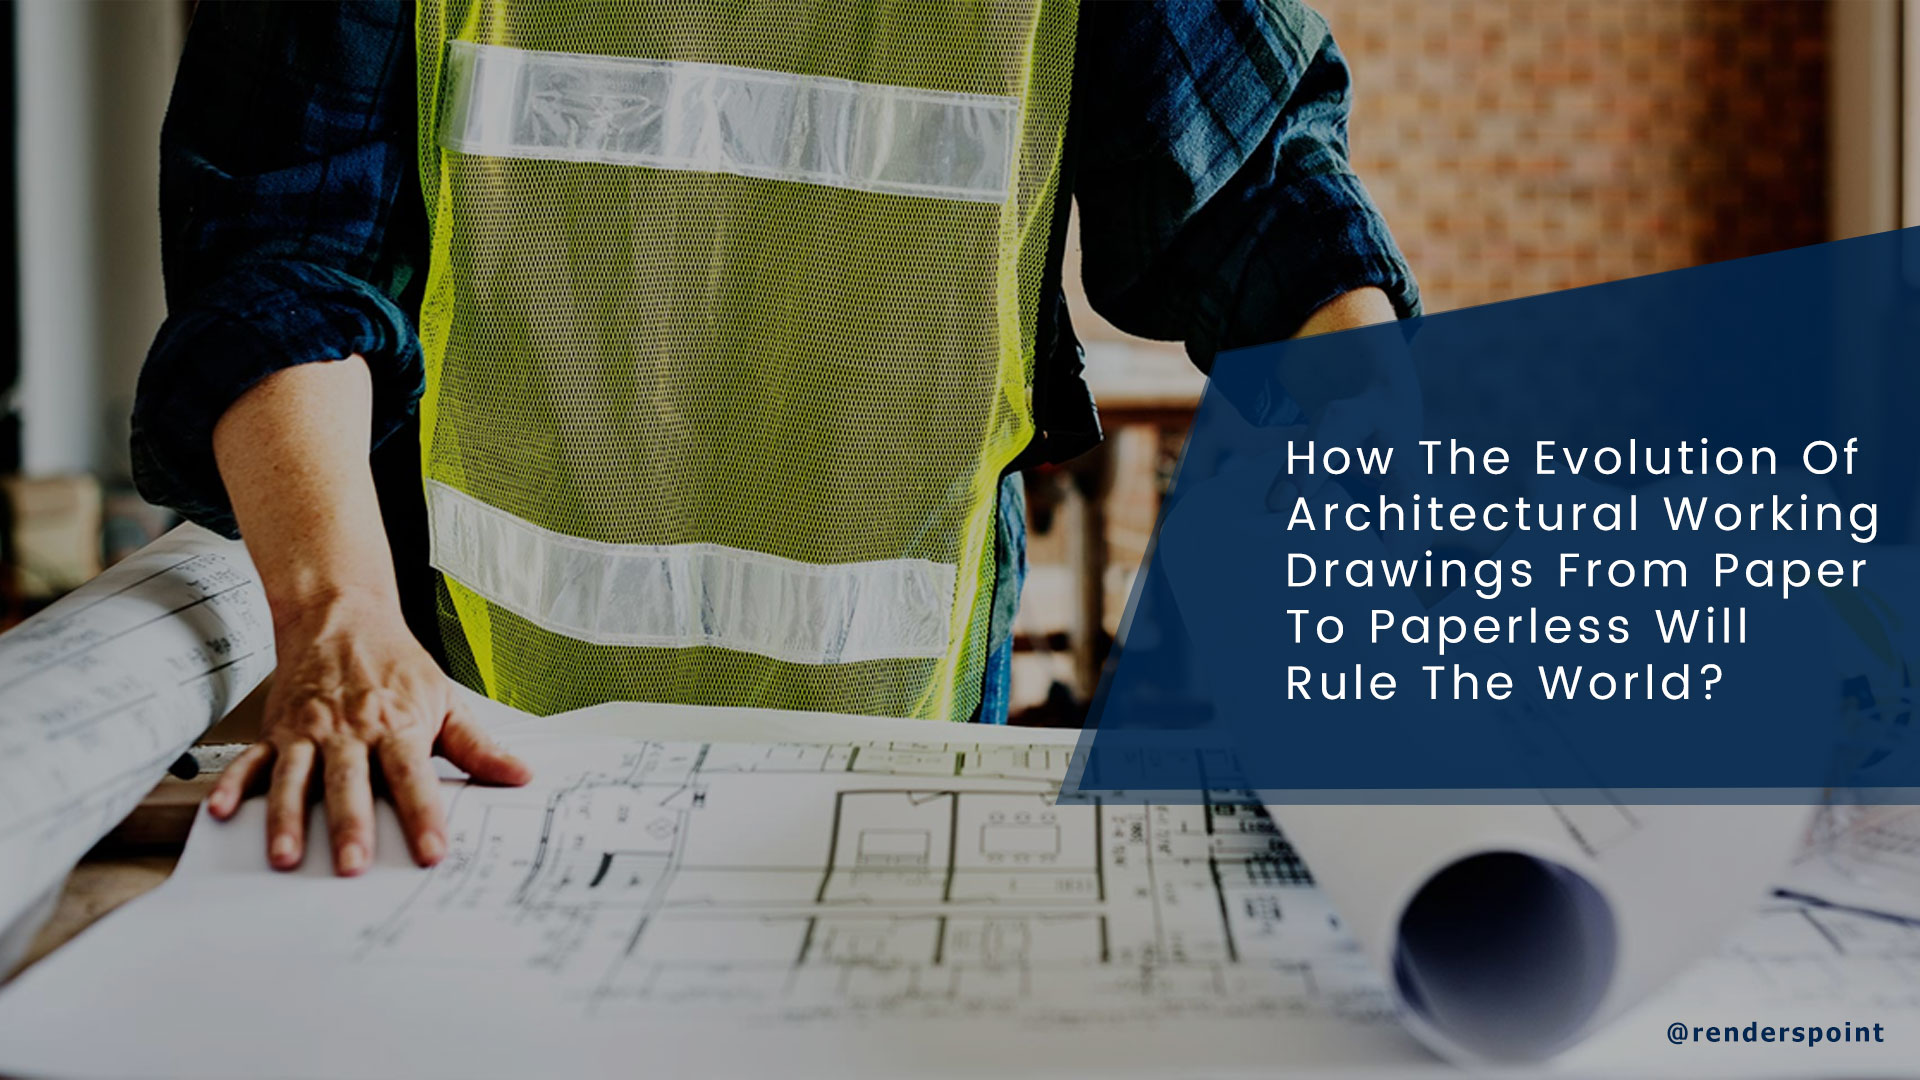 How the Evolution Of Architectural Working Drawings From Paper To Paperless will Rule The World?